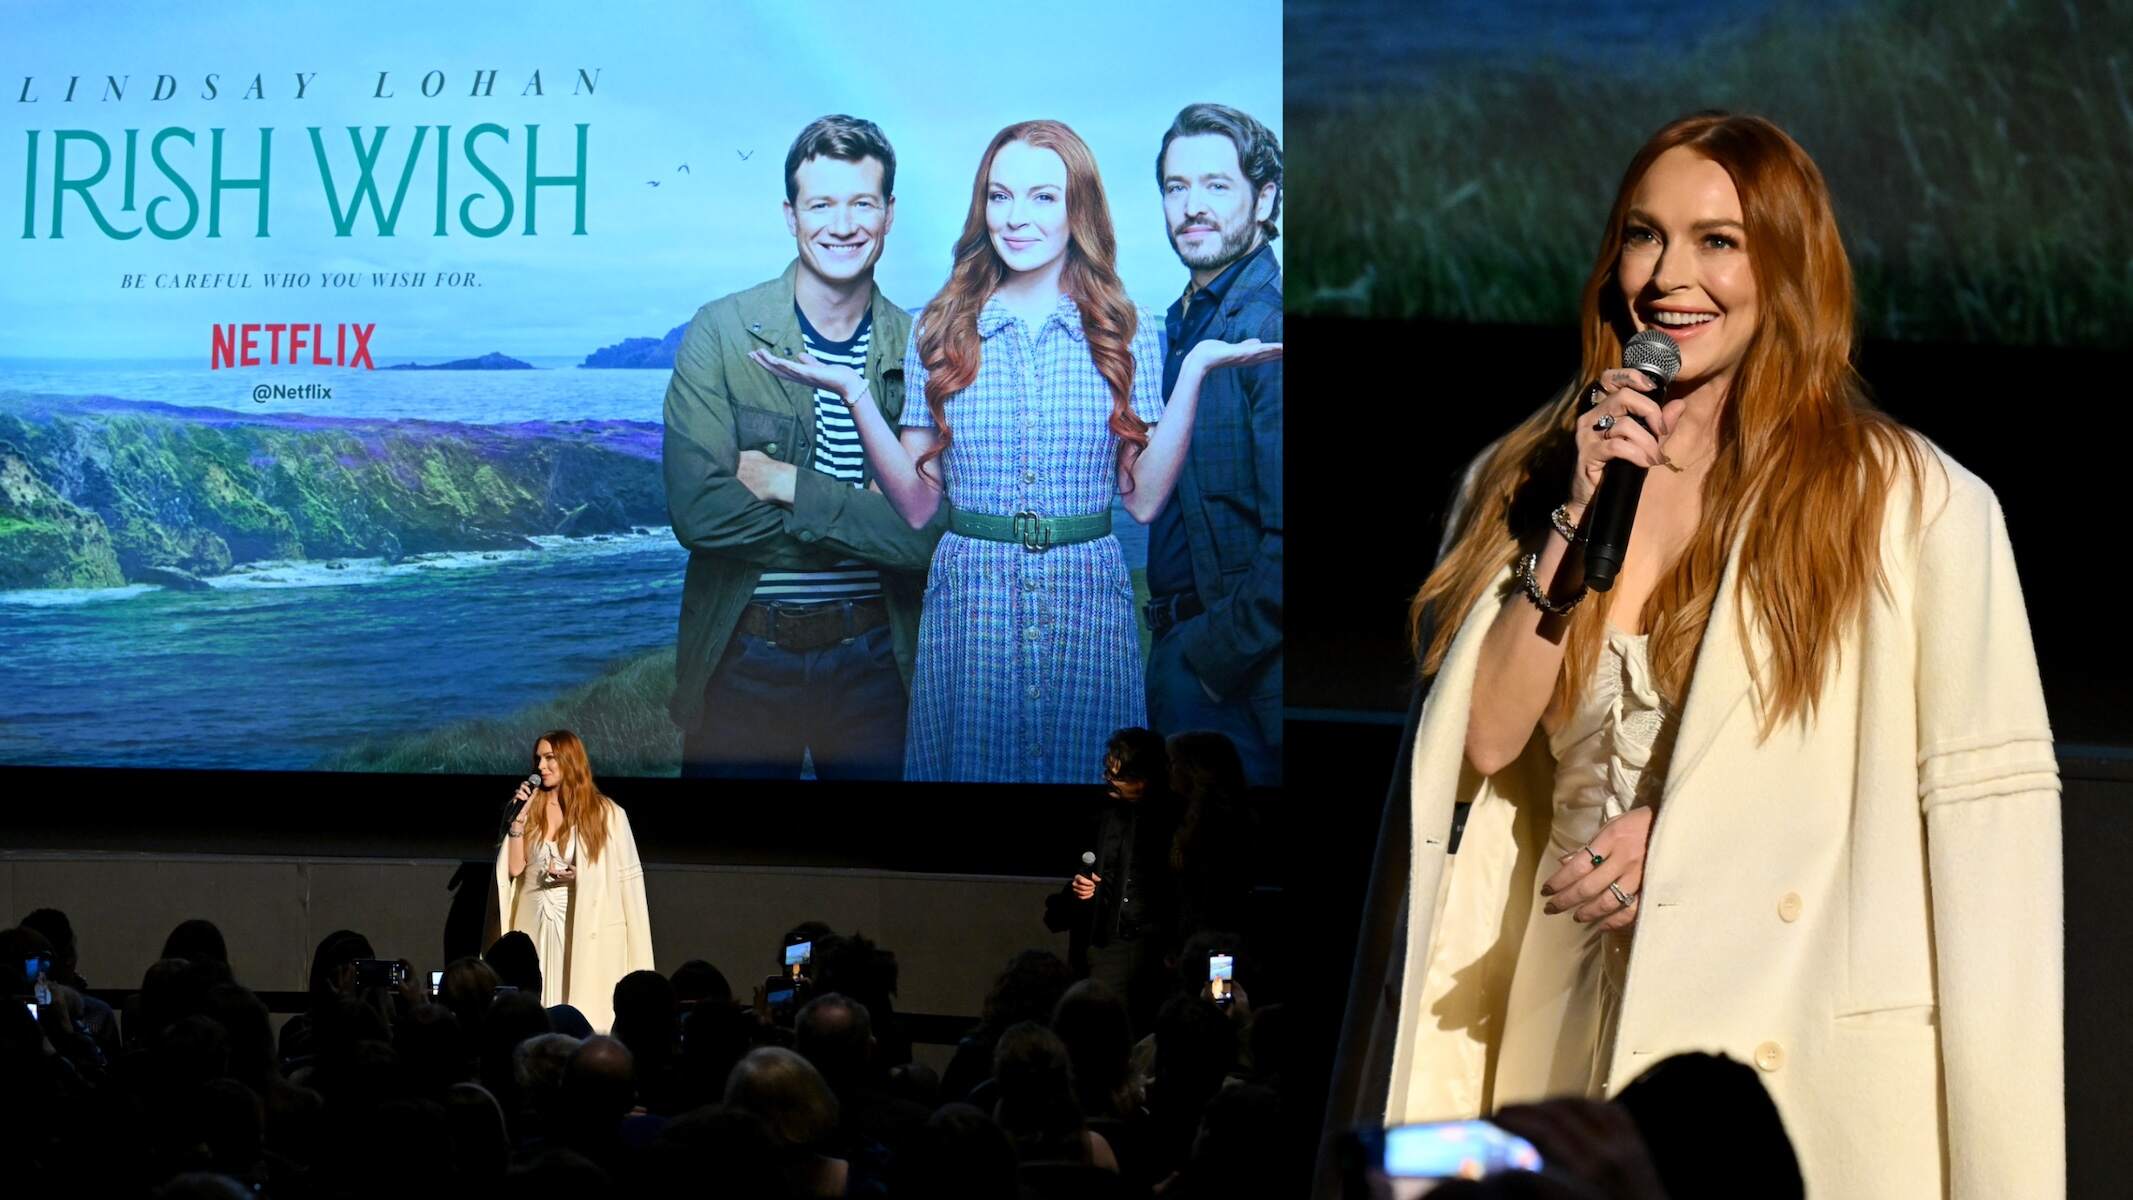 Actor Lindsay Lohan holds a microphone and speaks to the audience before Netflix's "Irish Wish" screening